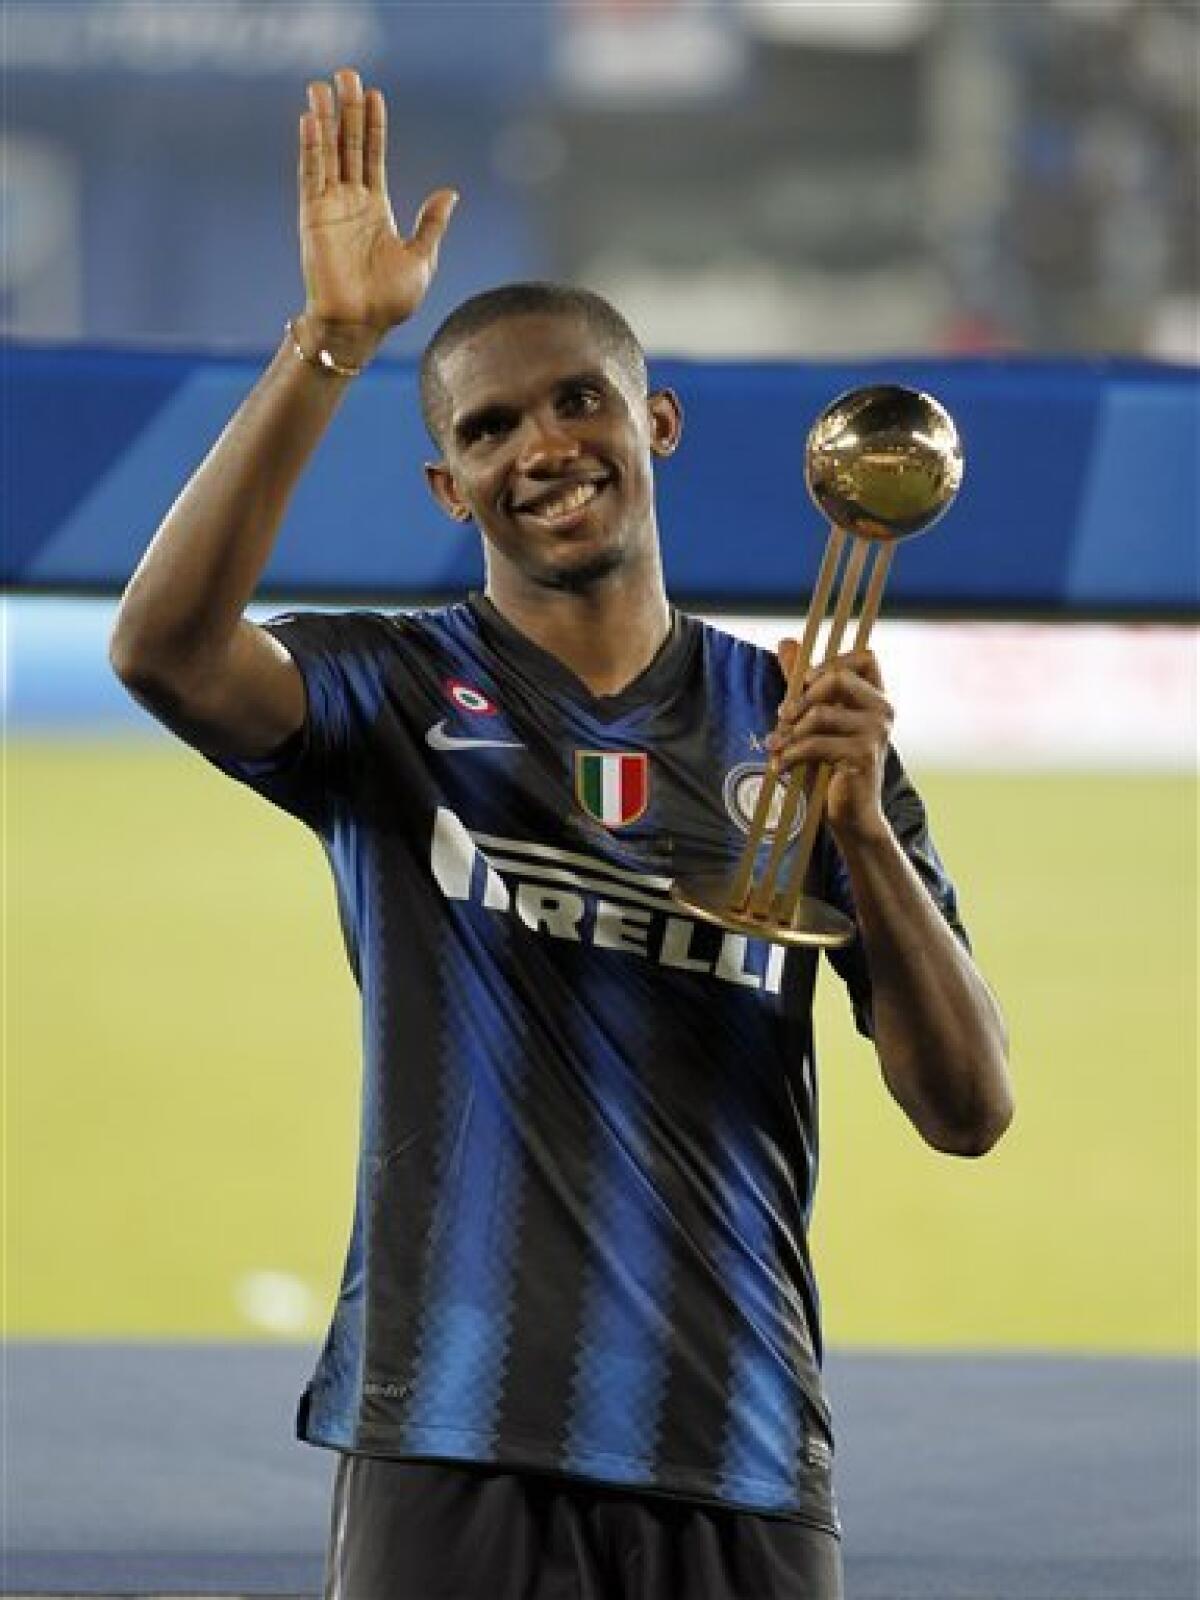 Inter Milan's Samuel Eto'o poses with his personal trophy following the Club World Cup final soccer match against TP Mazembe at Zayed sport city in Abu Dhabi, United Arab Emirates, Saturday, Dec. 18, 2010. (AP Photo/Hassan Ammar)